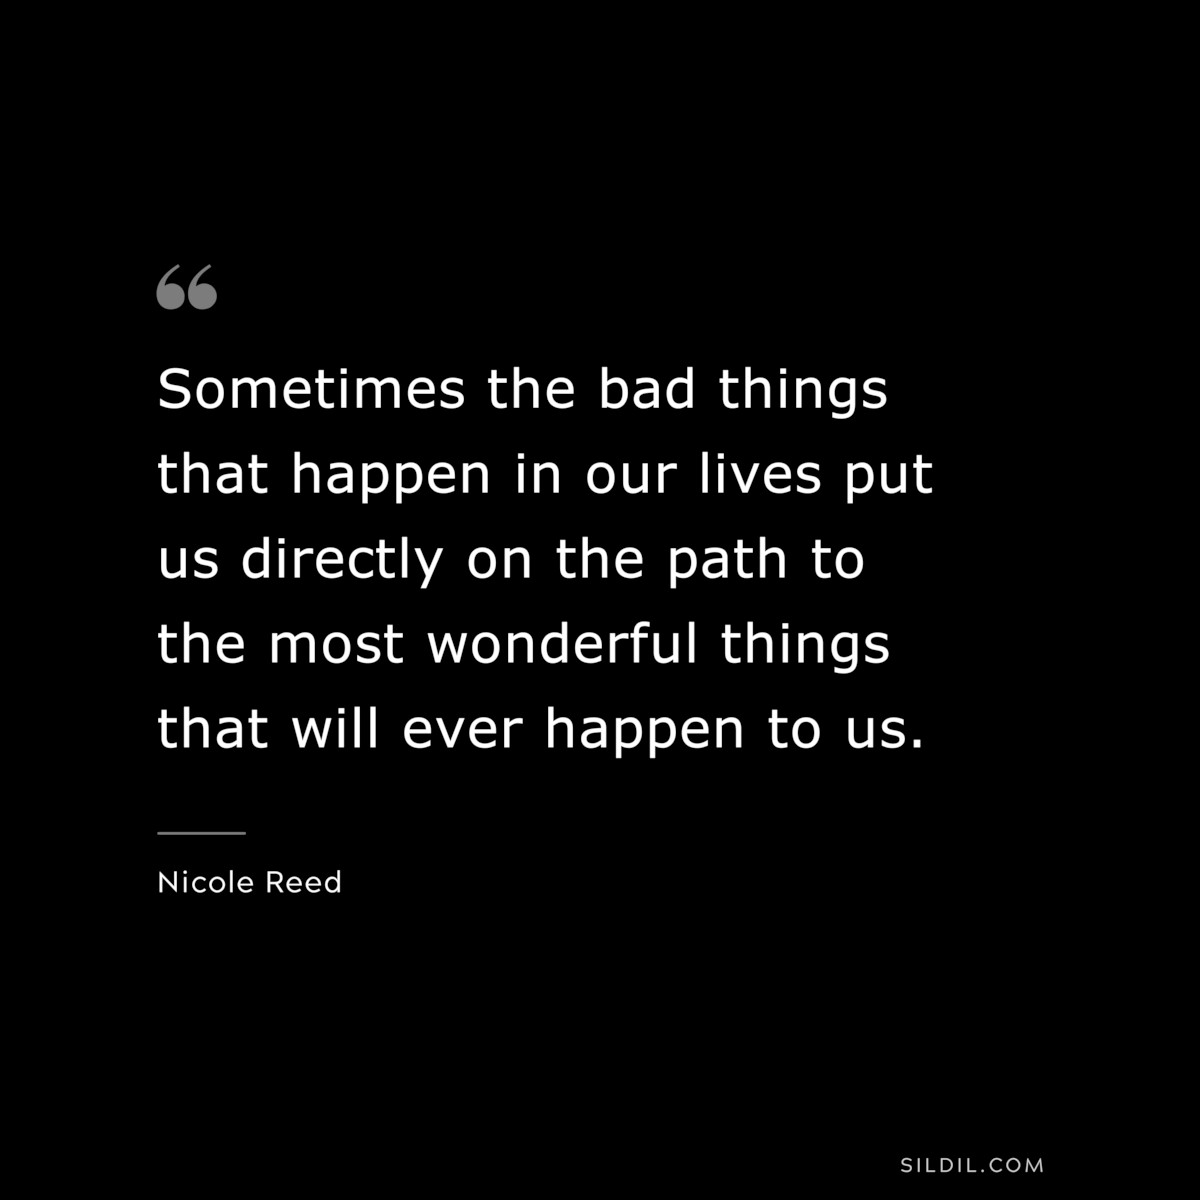 Sometimes the bad things that happen in our lives put us directly on the path to the most wonderful things that will ever happen to us. ― Nicole Reed